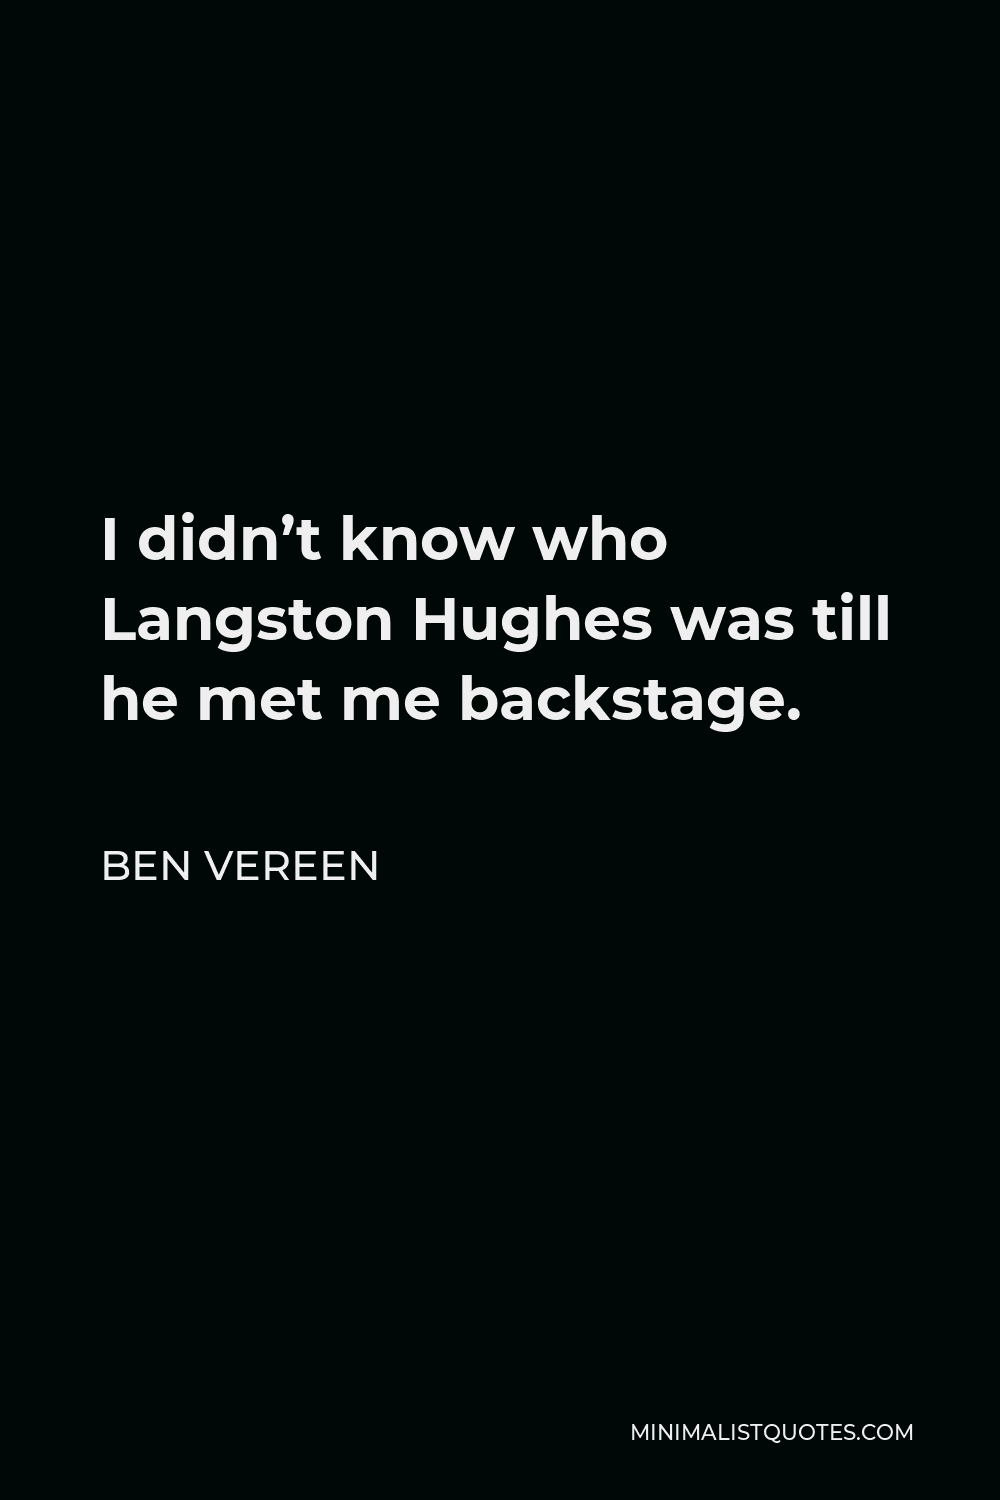 Ben Vereen Quote - I didn’t know who Langston Hughes was till he met me backstage.